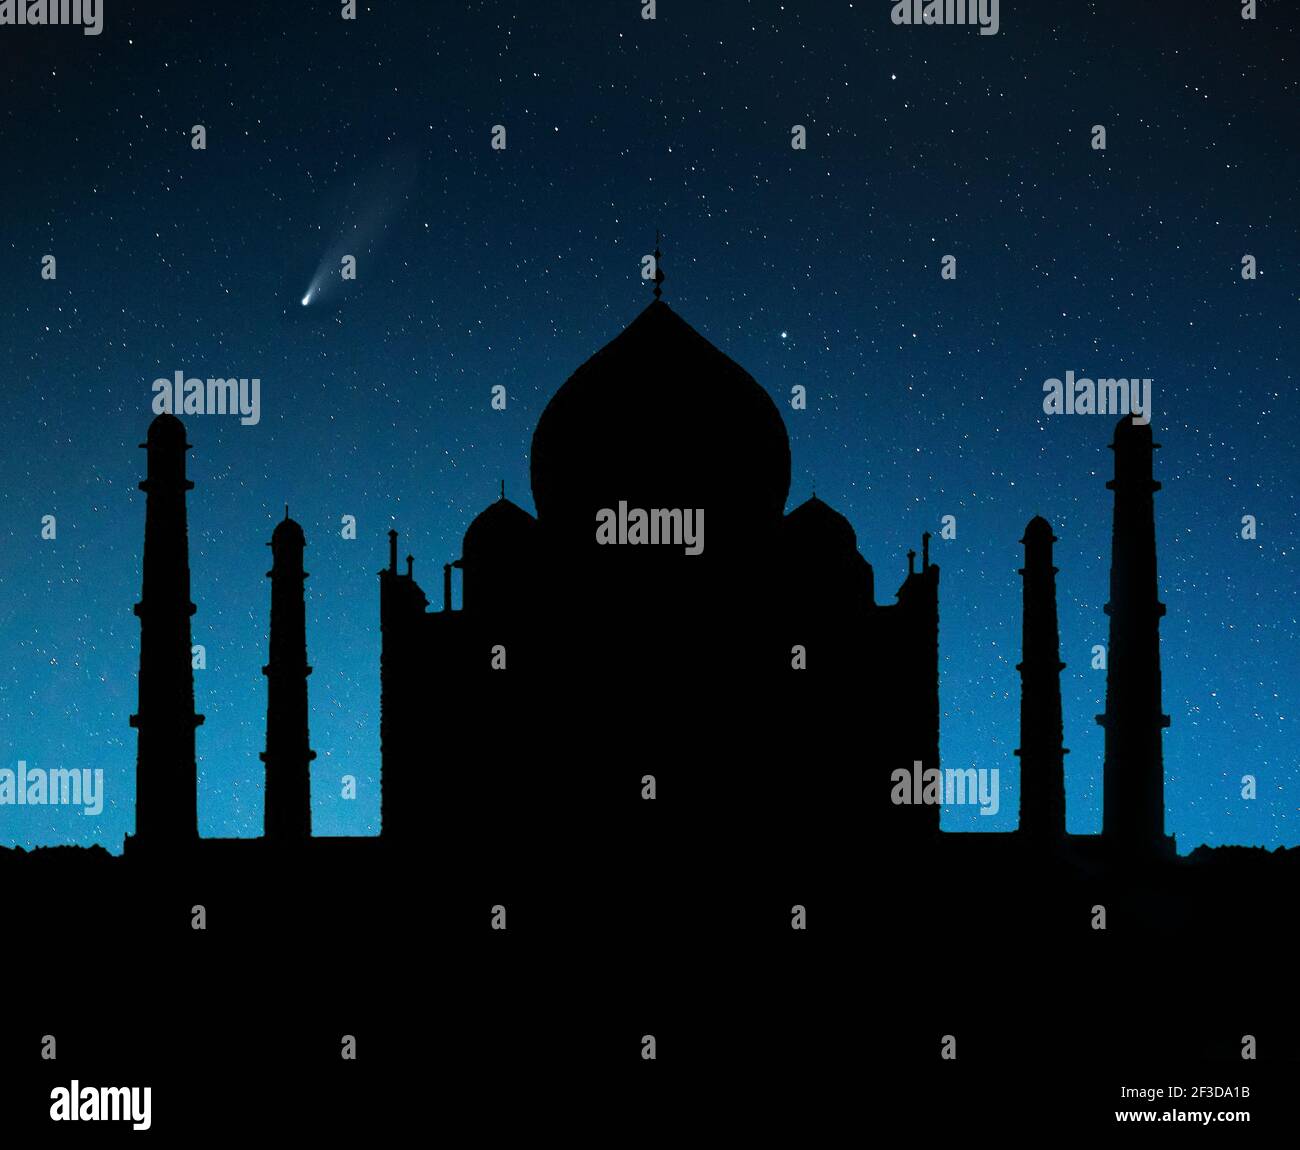 Taj Mahal tomb silhouette at night sky with stars and flying comet in Agra, Uttar Pradesh, India. Free space for your text Stock Photo